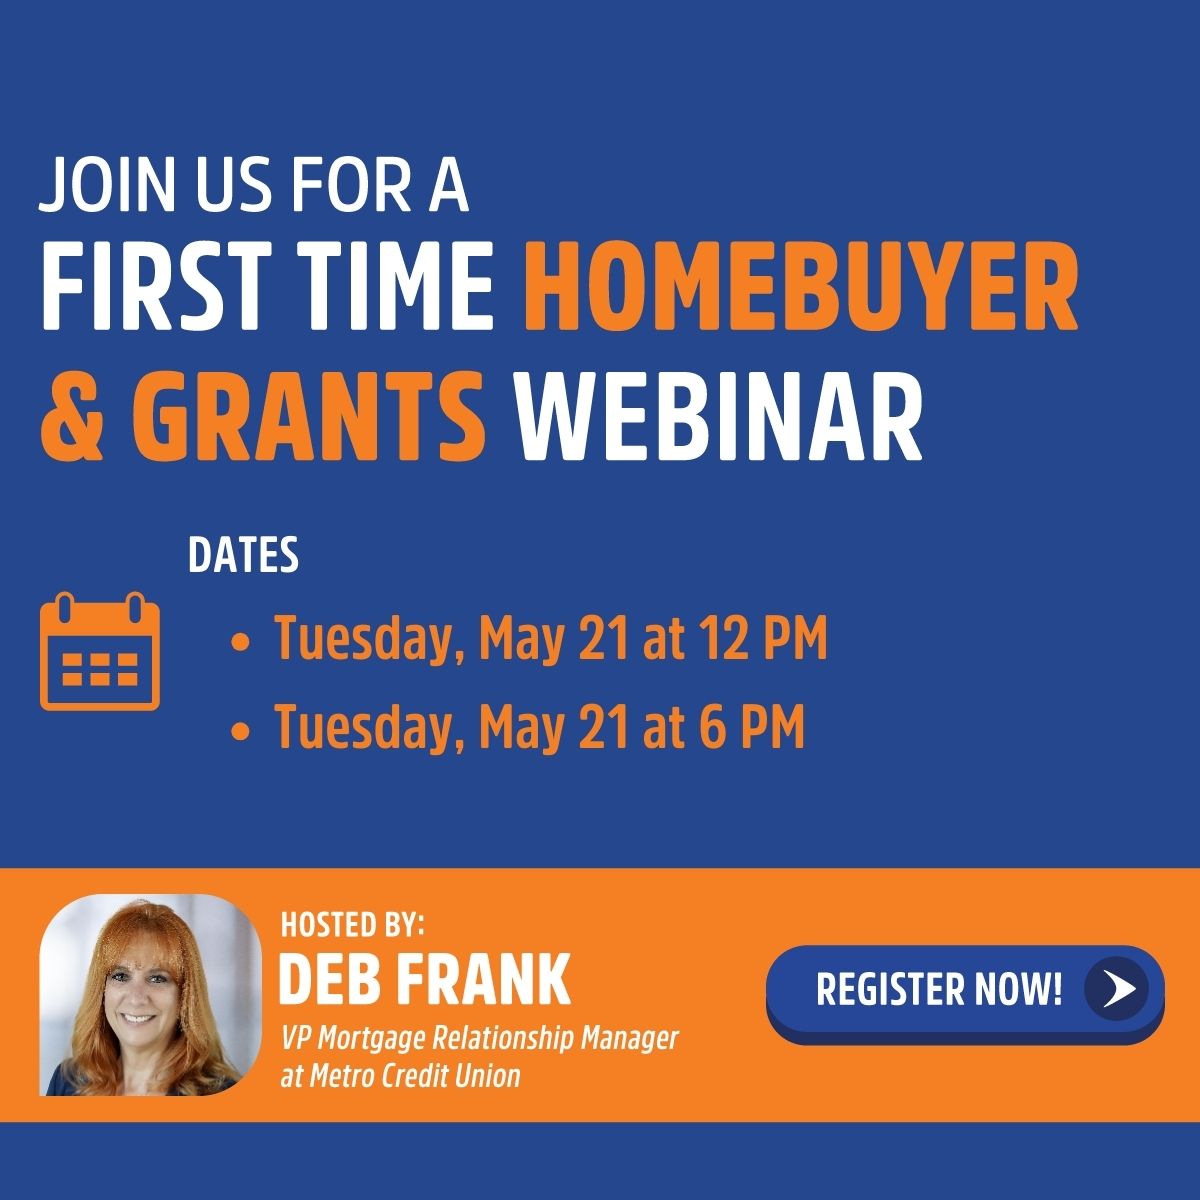 Warmer weather got you thinking about buying a home? Metro can help. Join us for a free #webinar for #firsttimehomebuyers and learn everything you need to know to become a #homeowner. ow.ly/Z9tU50RtBhM #mortgages #loans